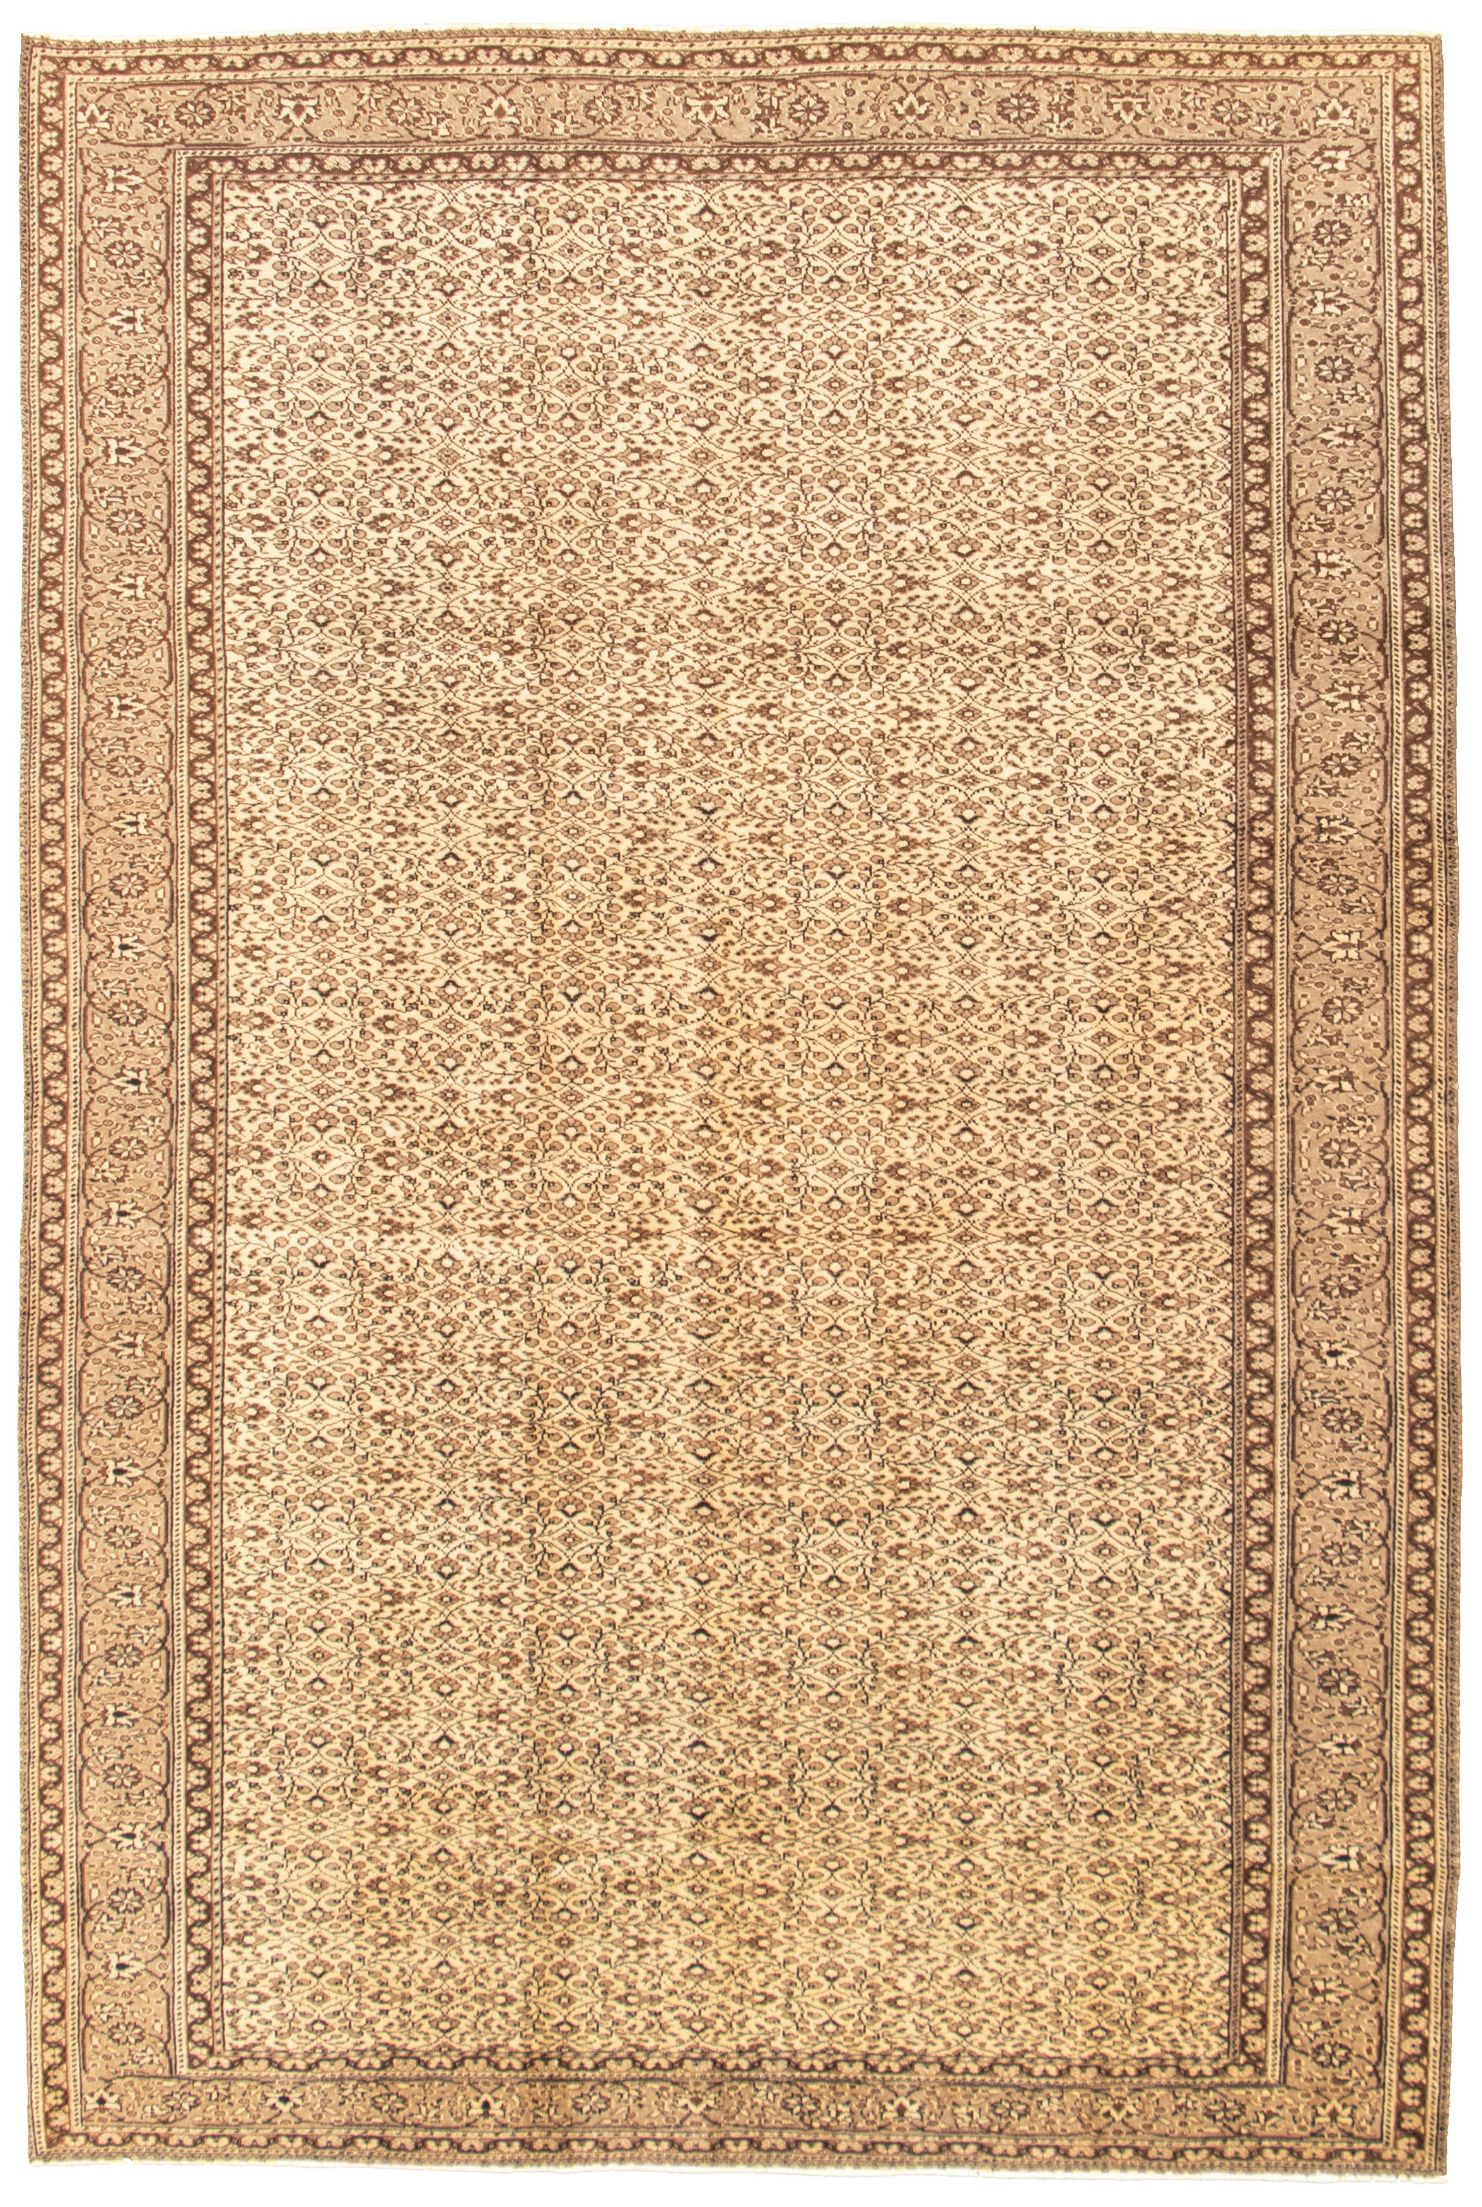 Hand-knotted Keisari Vintage Cream Wool Rug 6'3" x 9'5" Size: 6'3" x 9'5"  